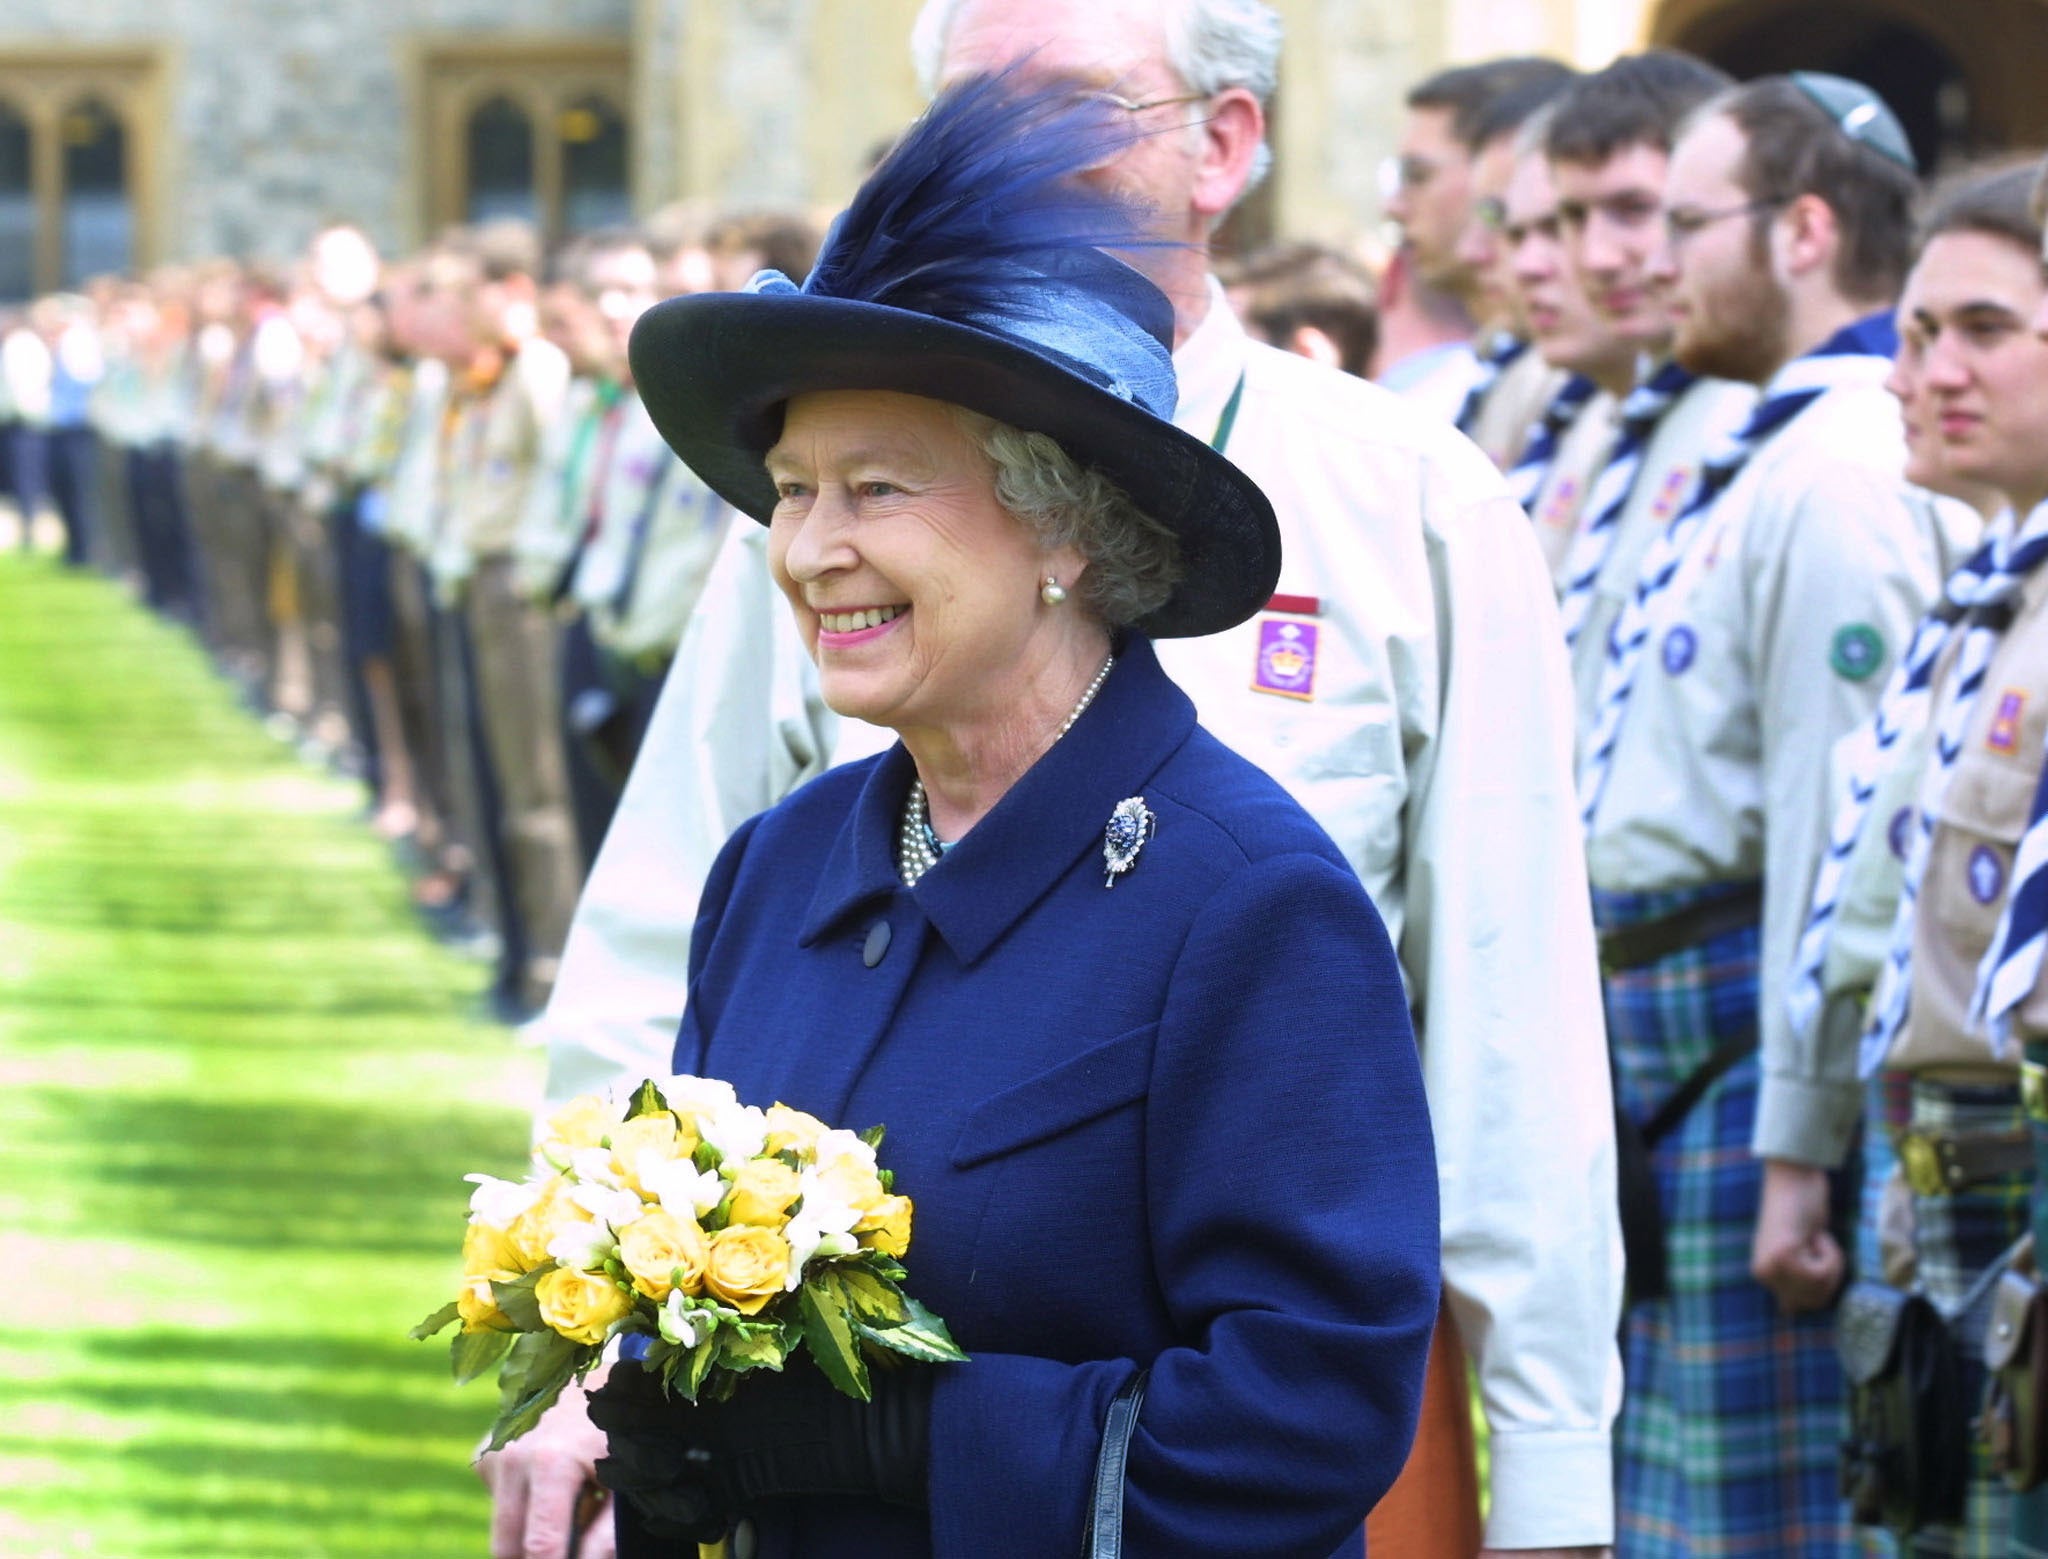 A number of planned strikes have been called off after the Queen’s death on Thursday